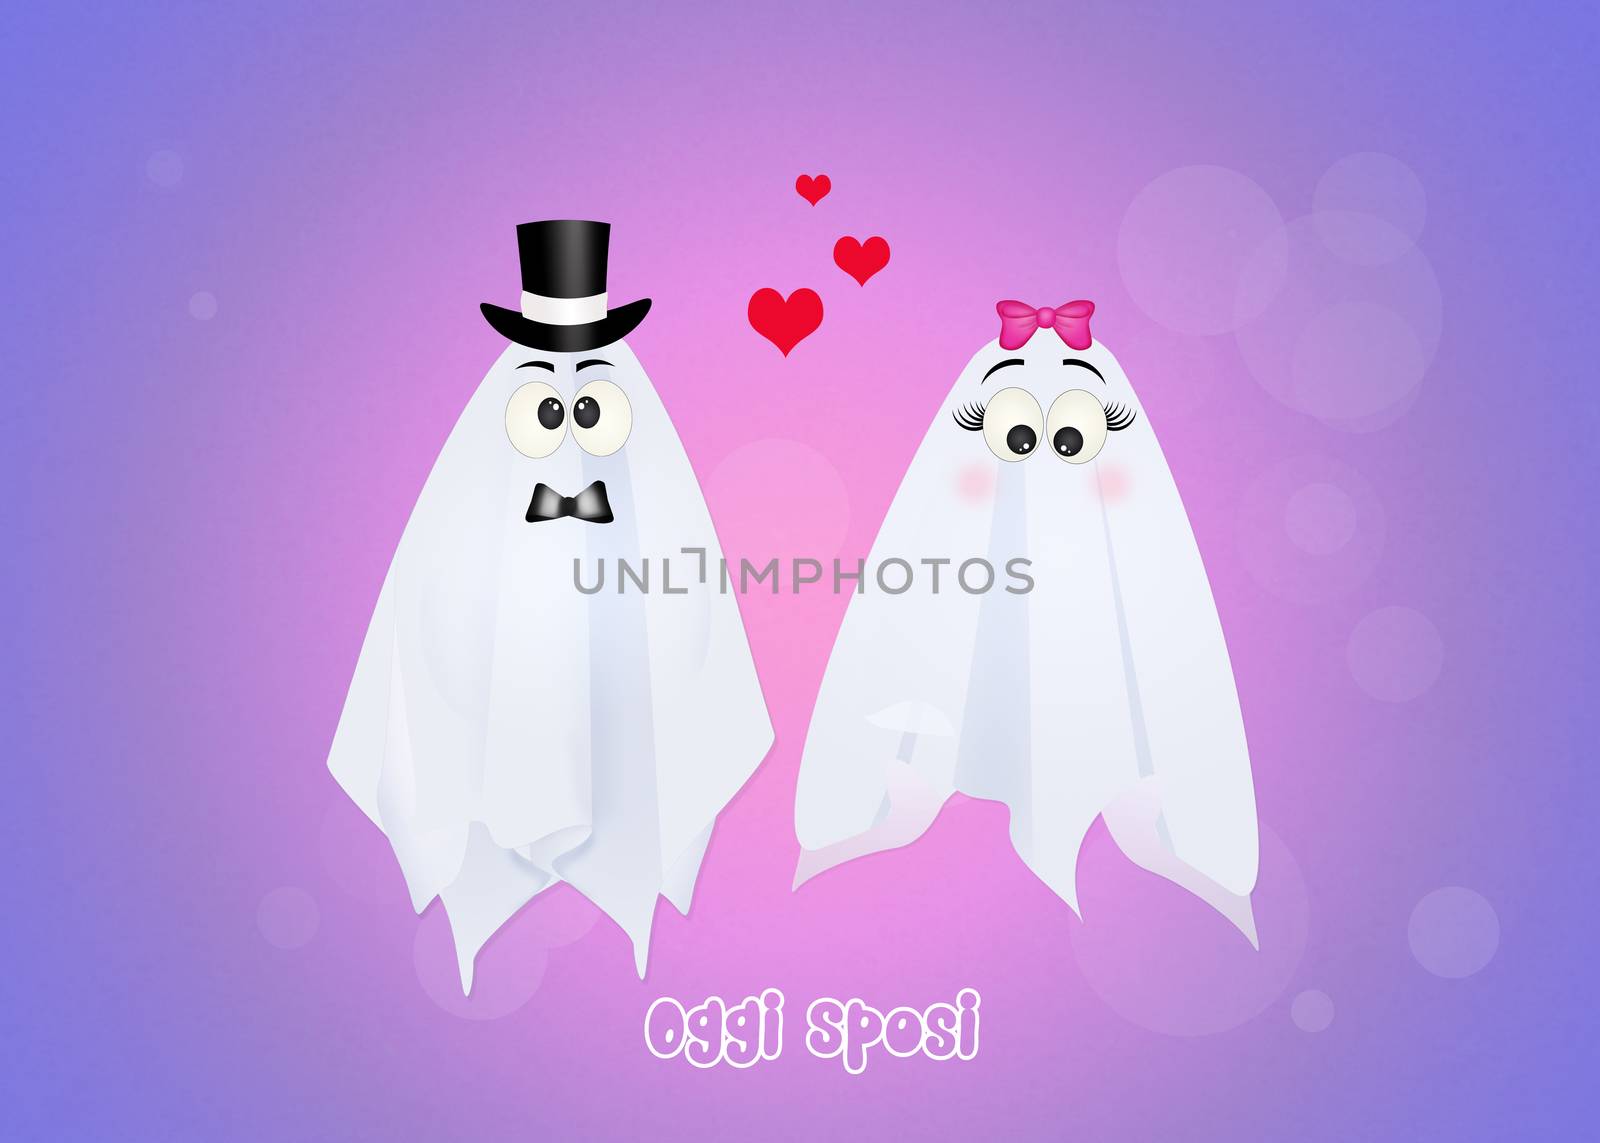 Wedding of ghosts by adrenalina